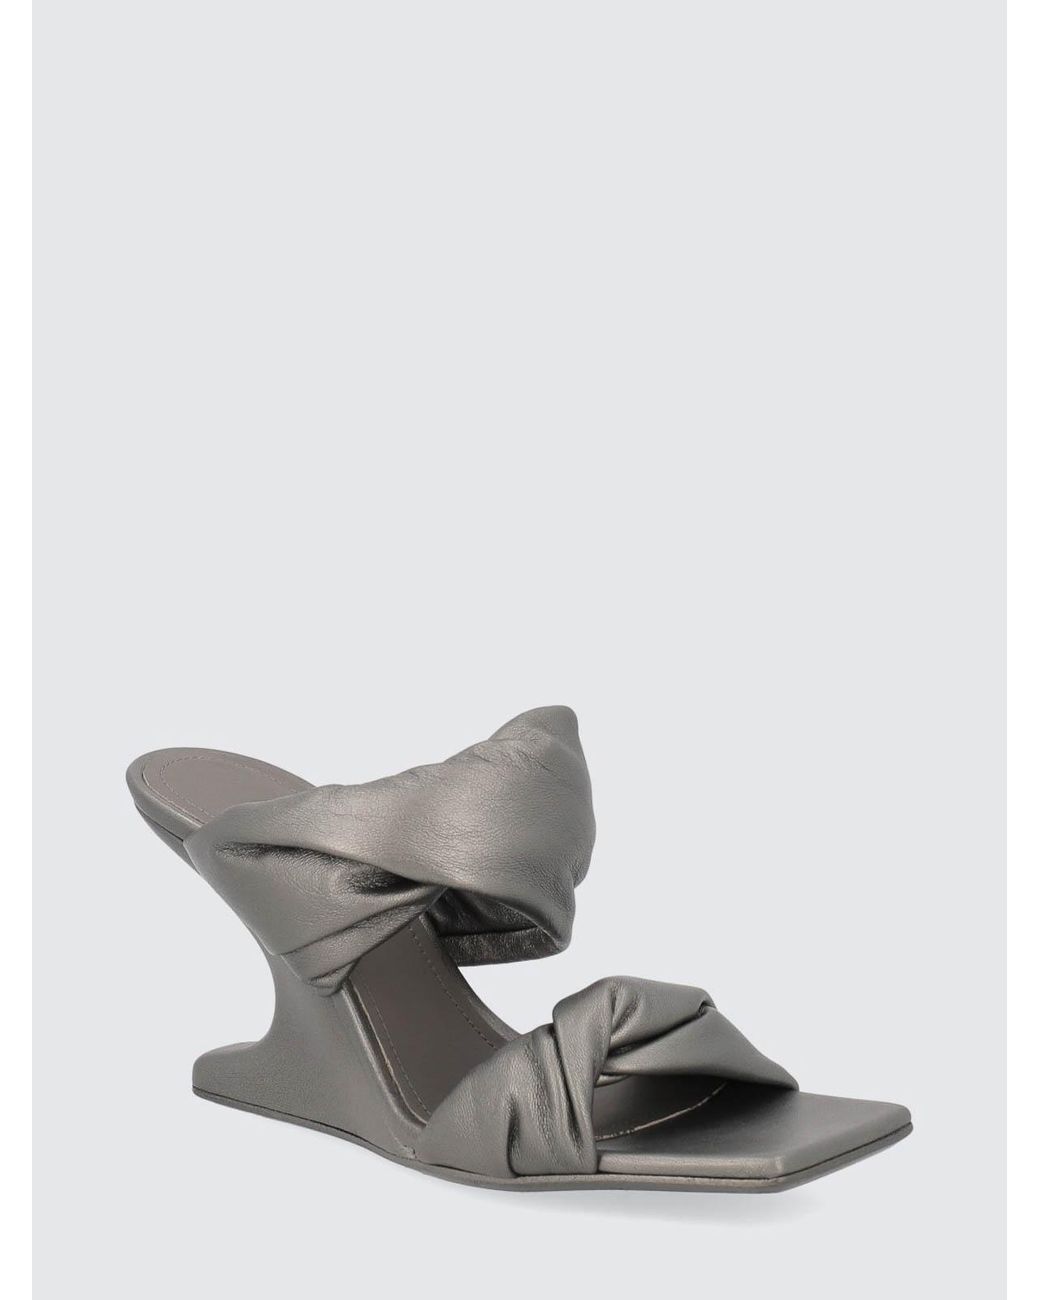 Cantilever leather wedge sandals